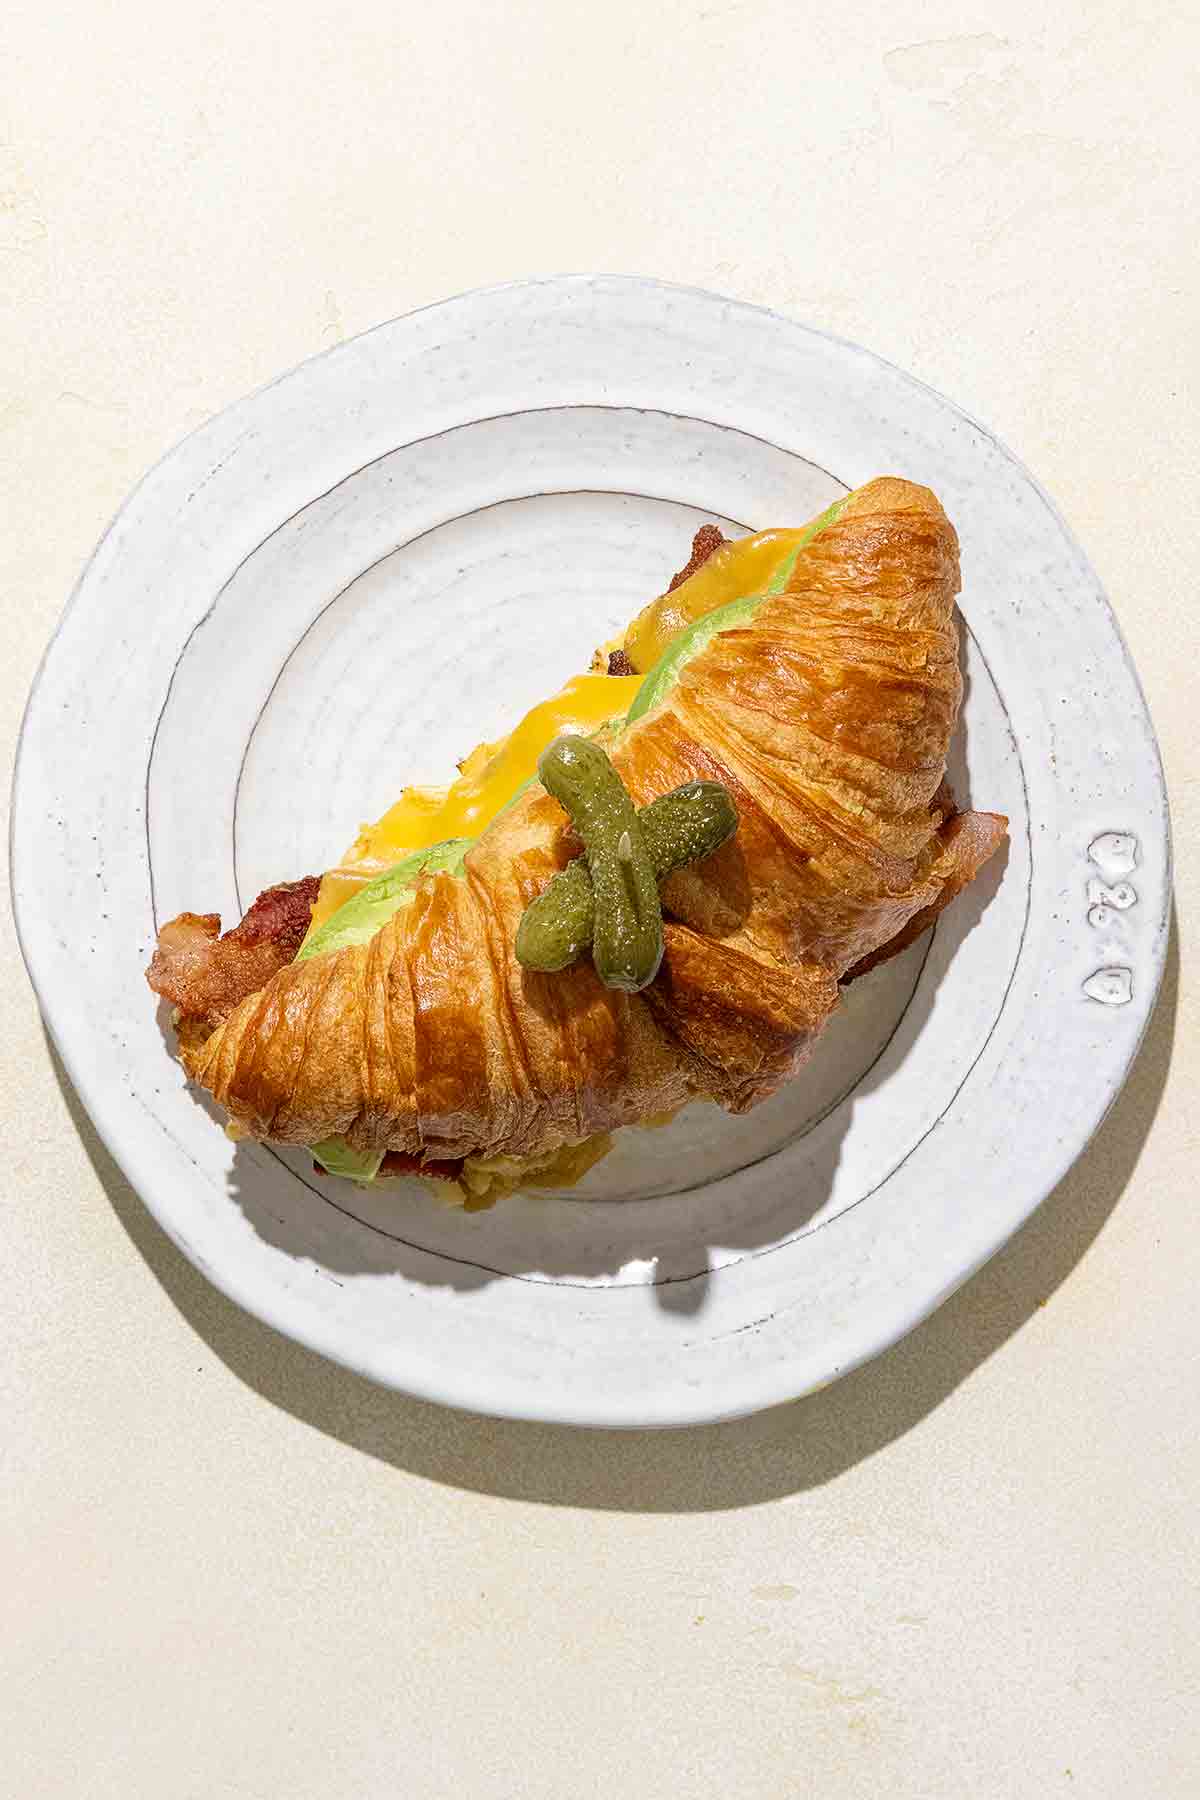 A croissant sandwich topped with two baby pickles on a white plate.